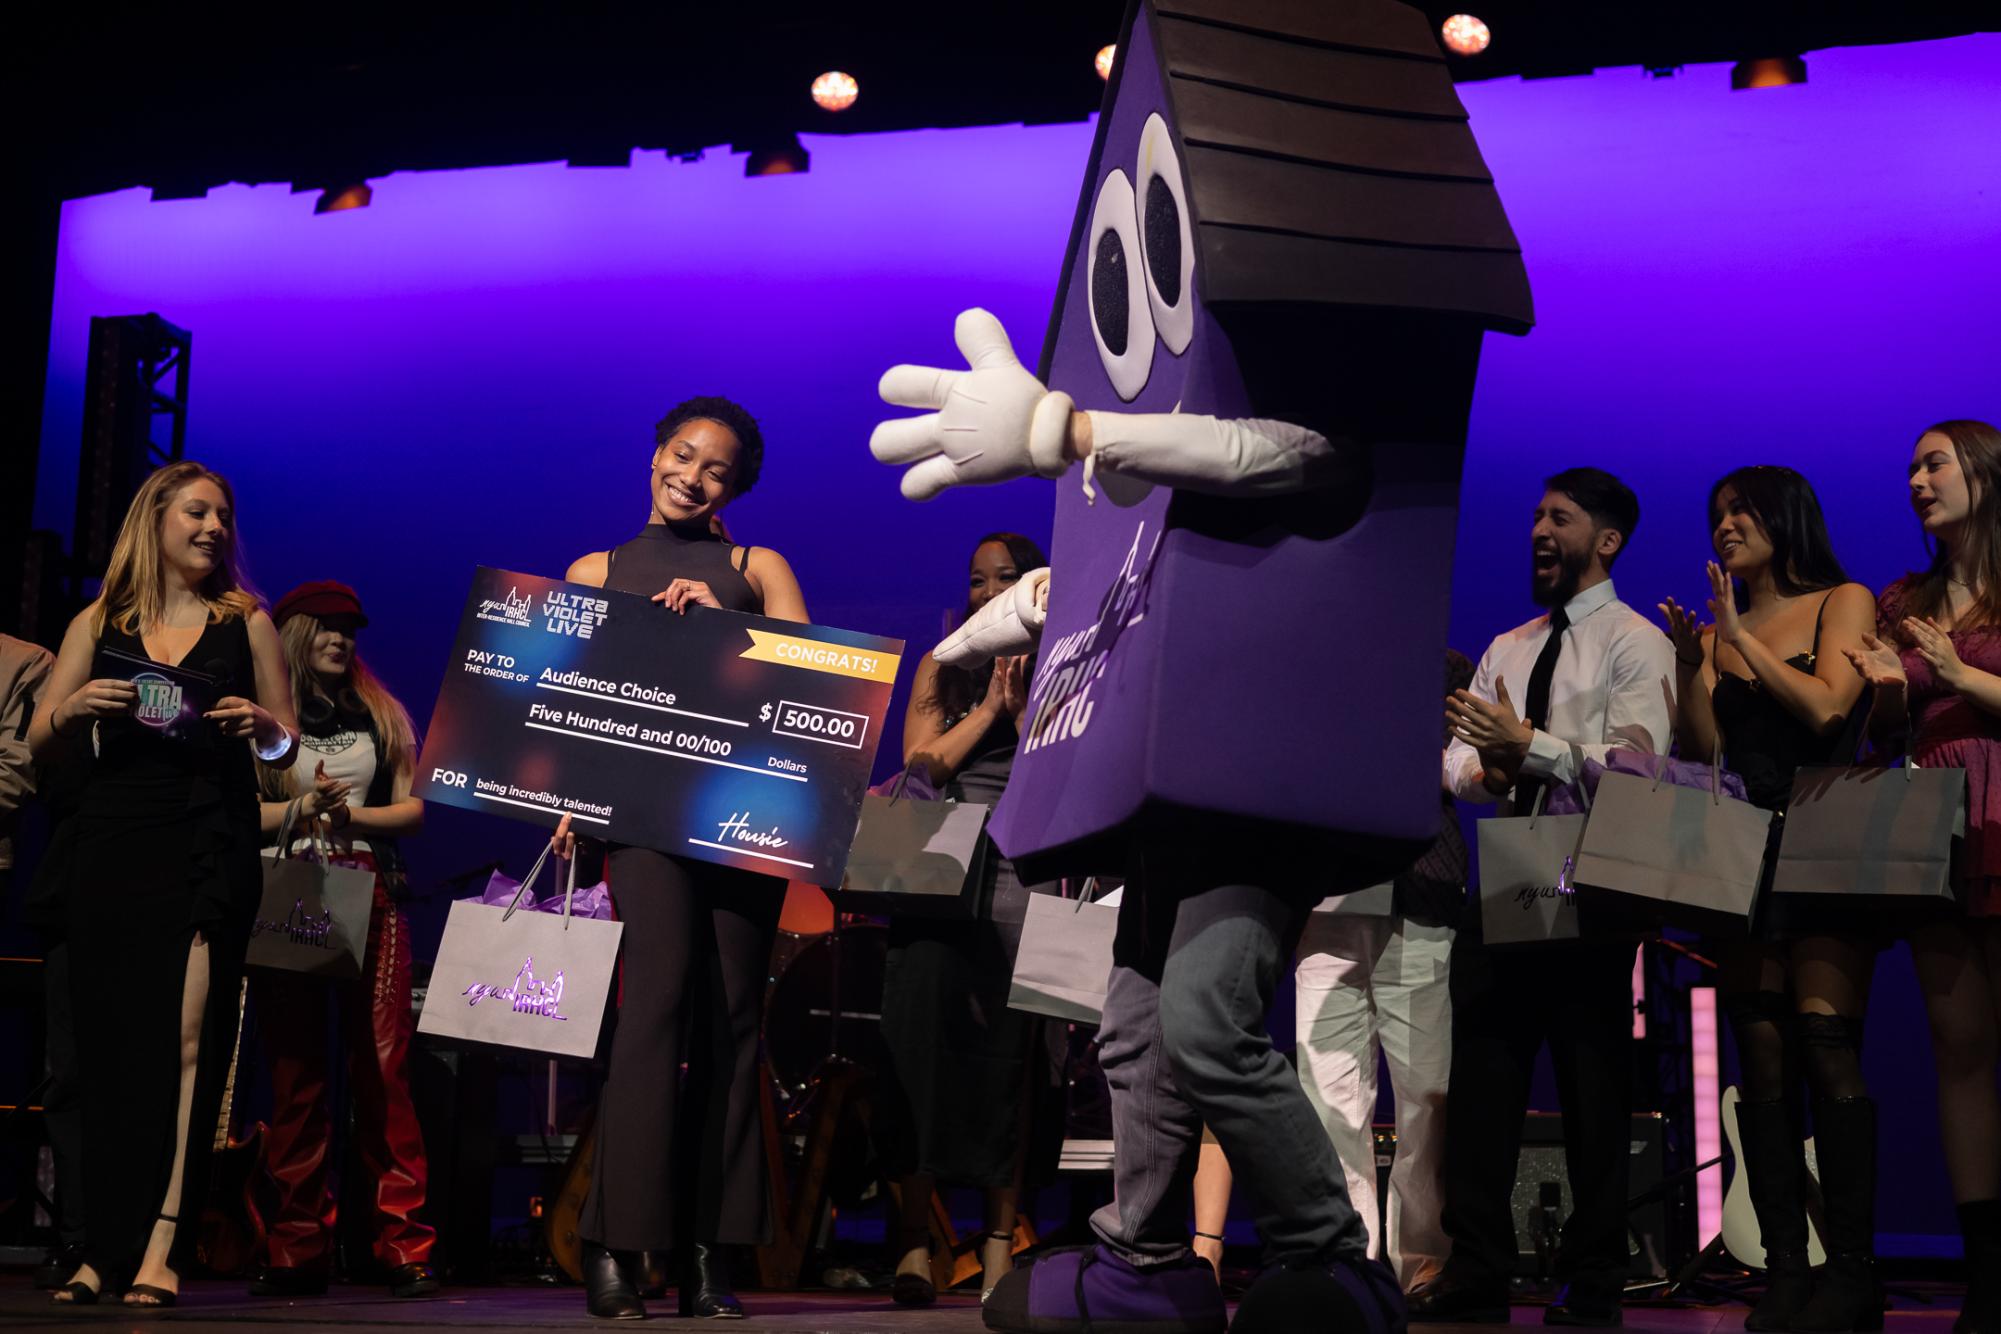 A purple house mascot gestures toward a woman holding a giant cardboard check for $500.